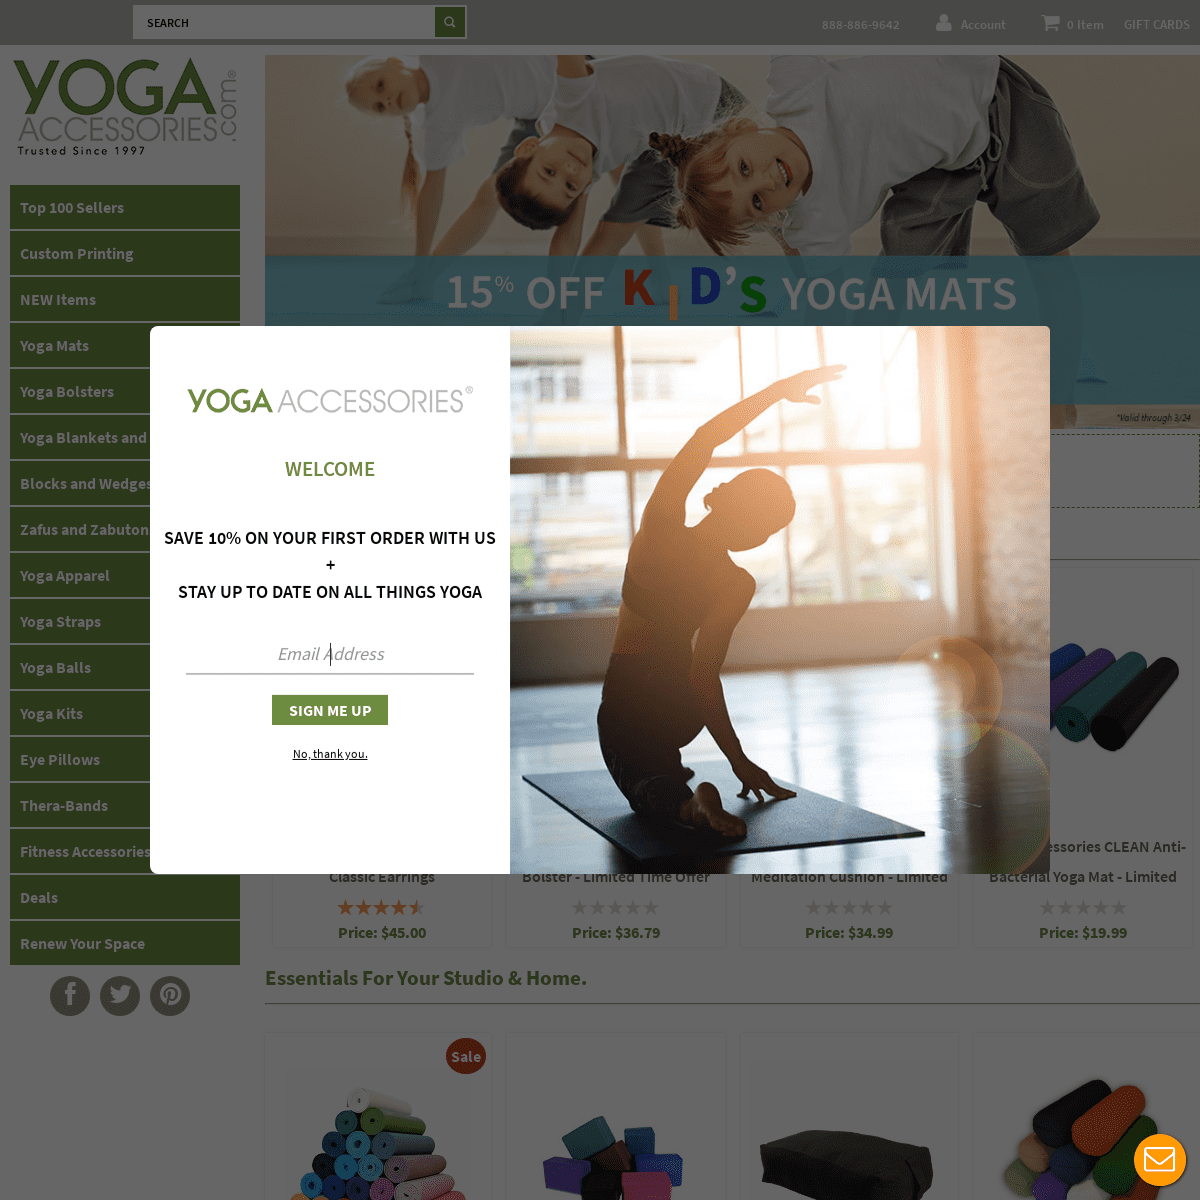 A complete backup of yogaaccessories.com